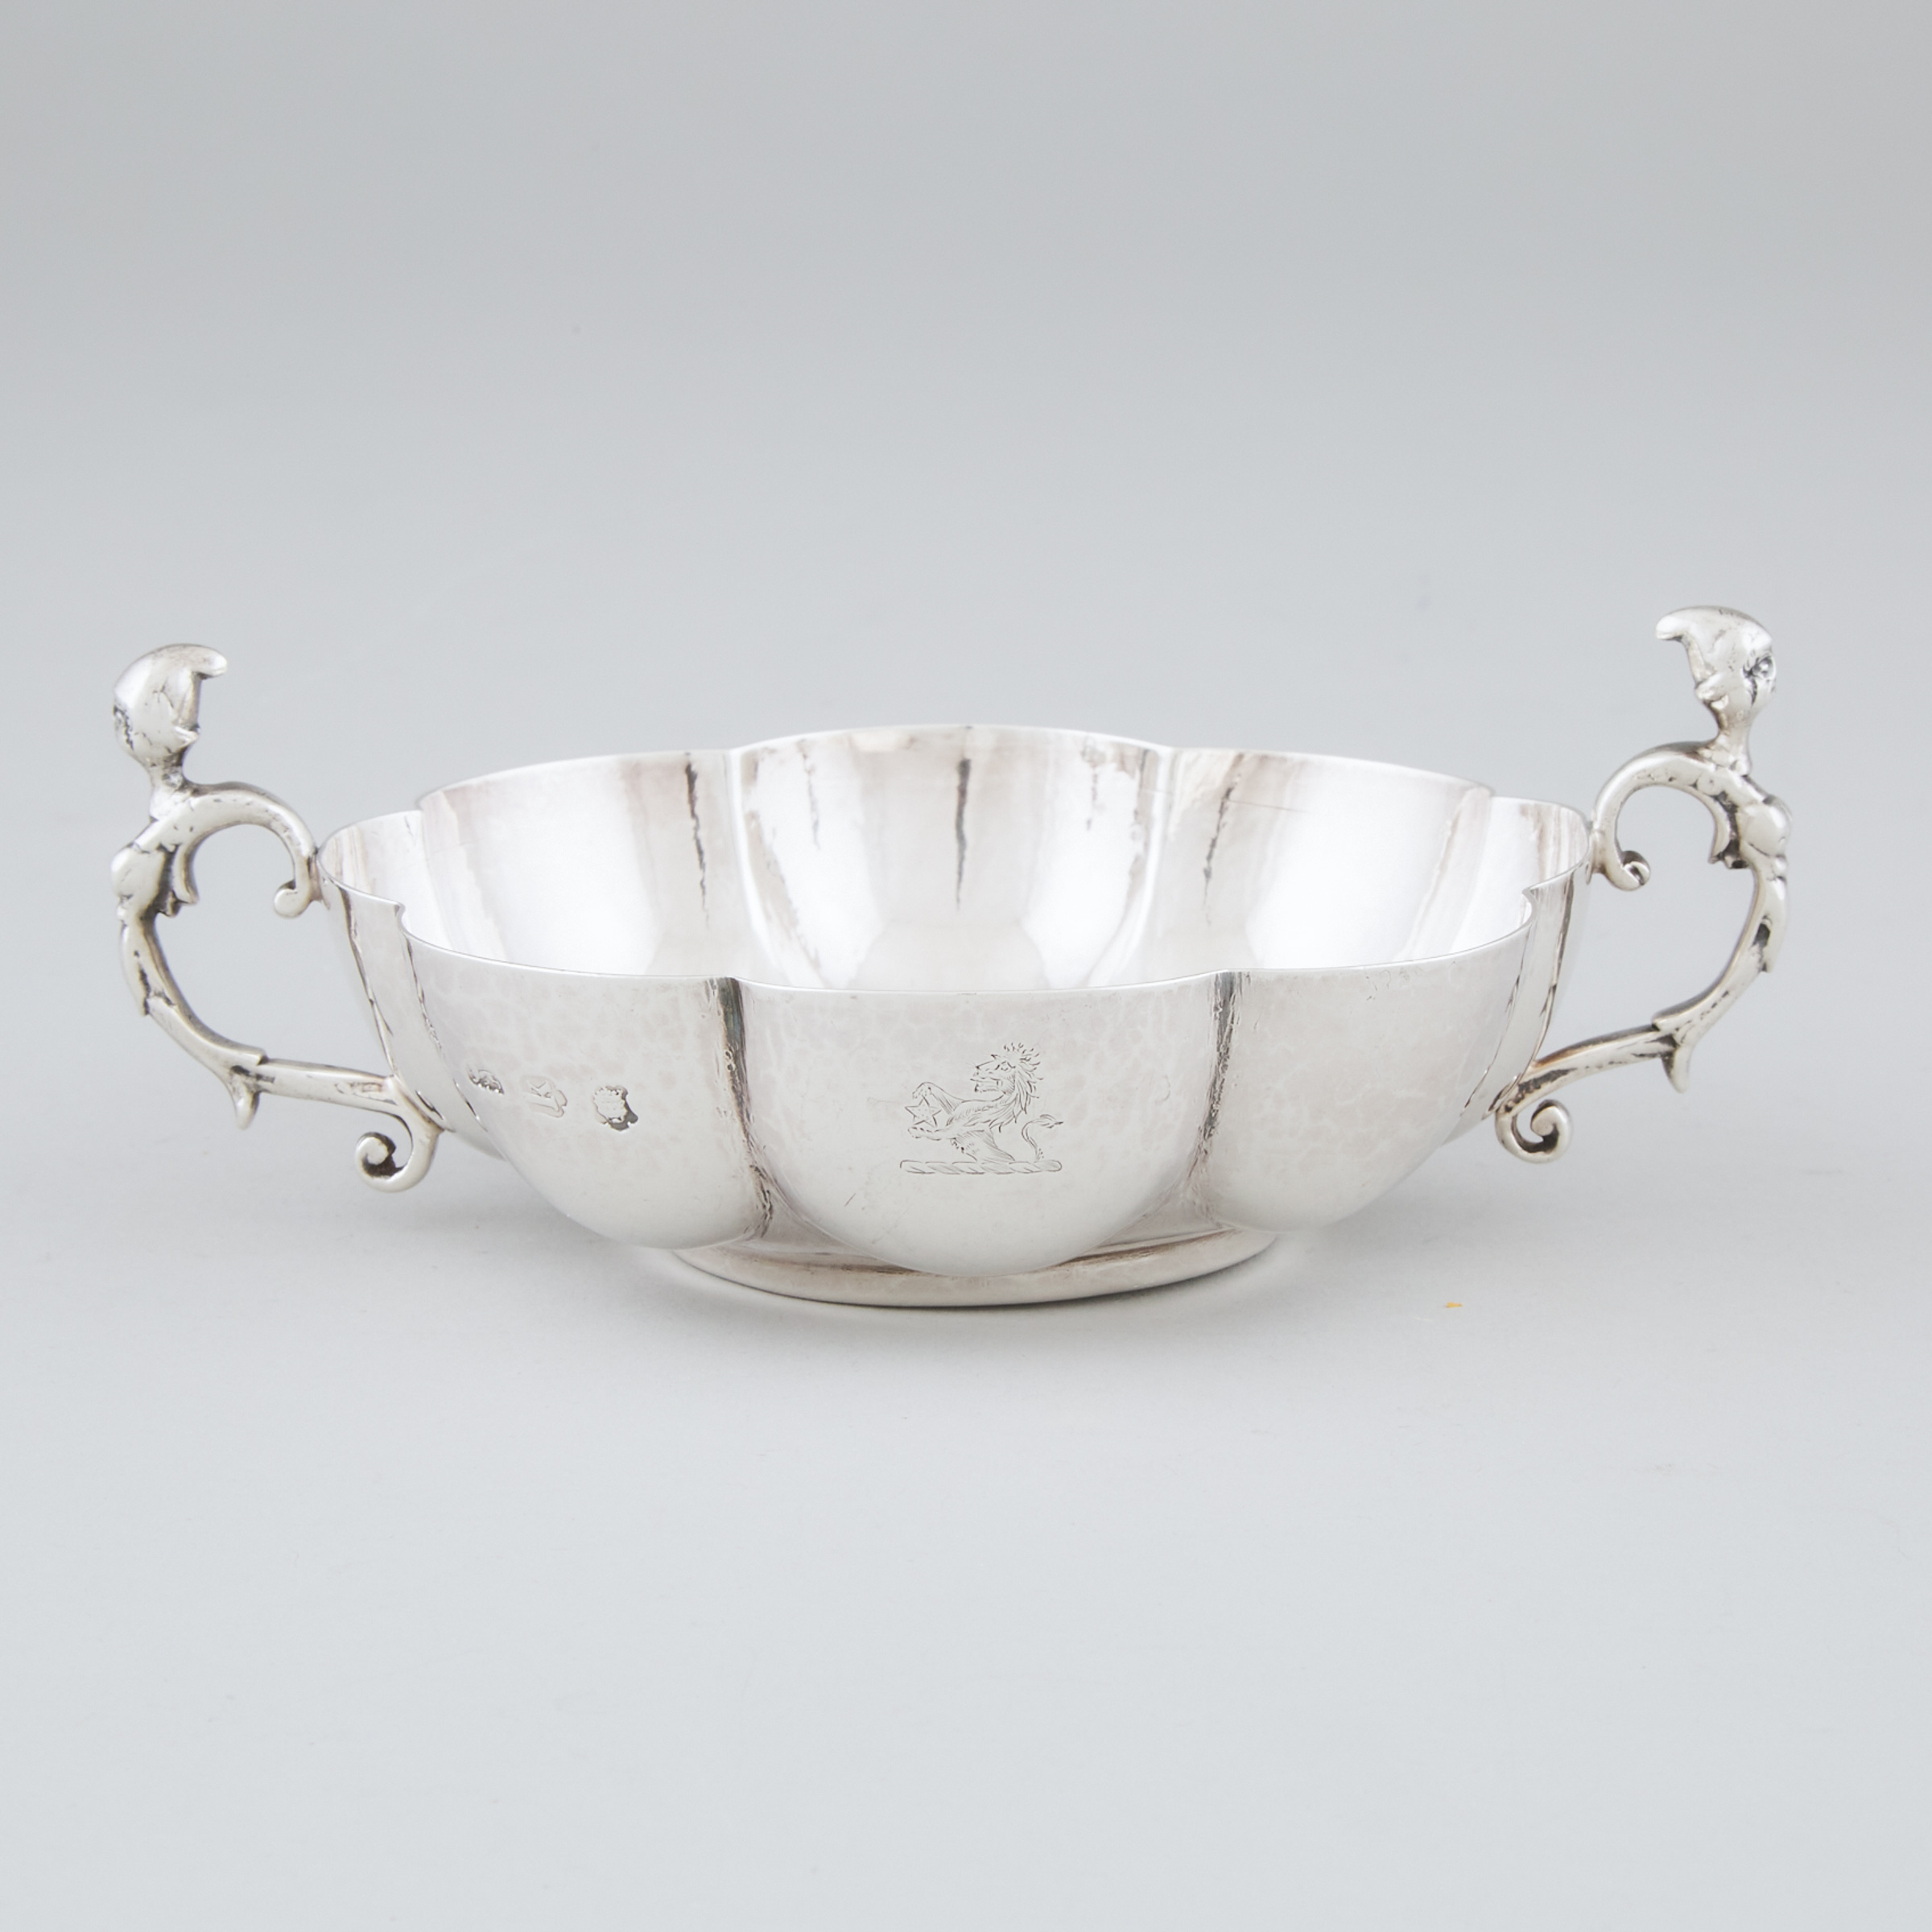 George II Silver Lobed Two-Handled Bowl, Aymé Videau, London, 1745